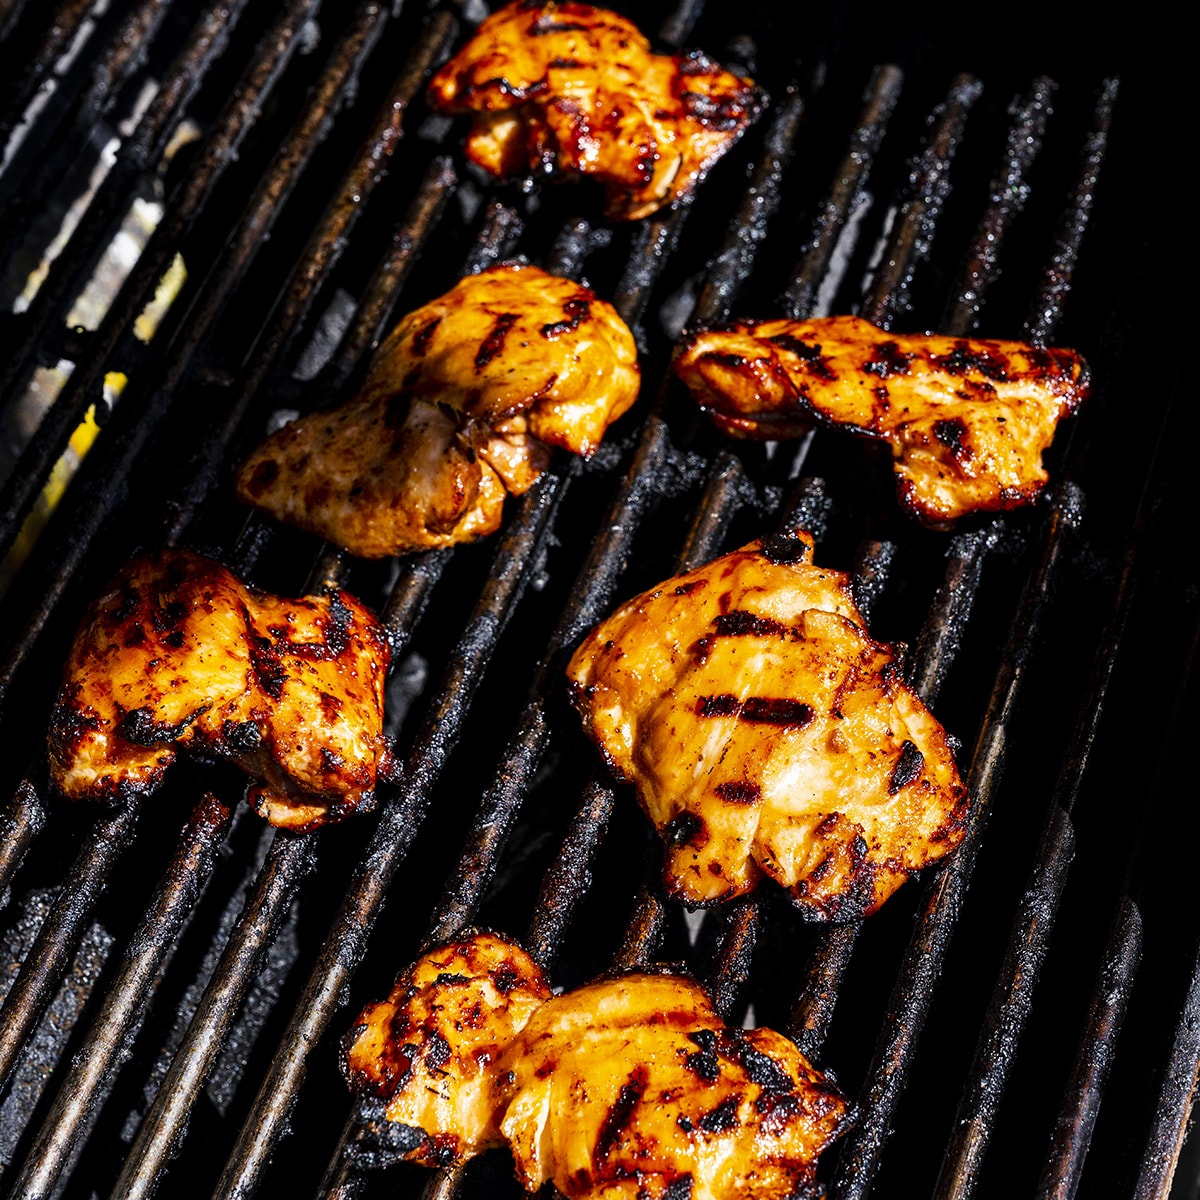 Boneless chicken thighs on the grill.